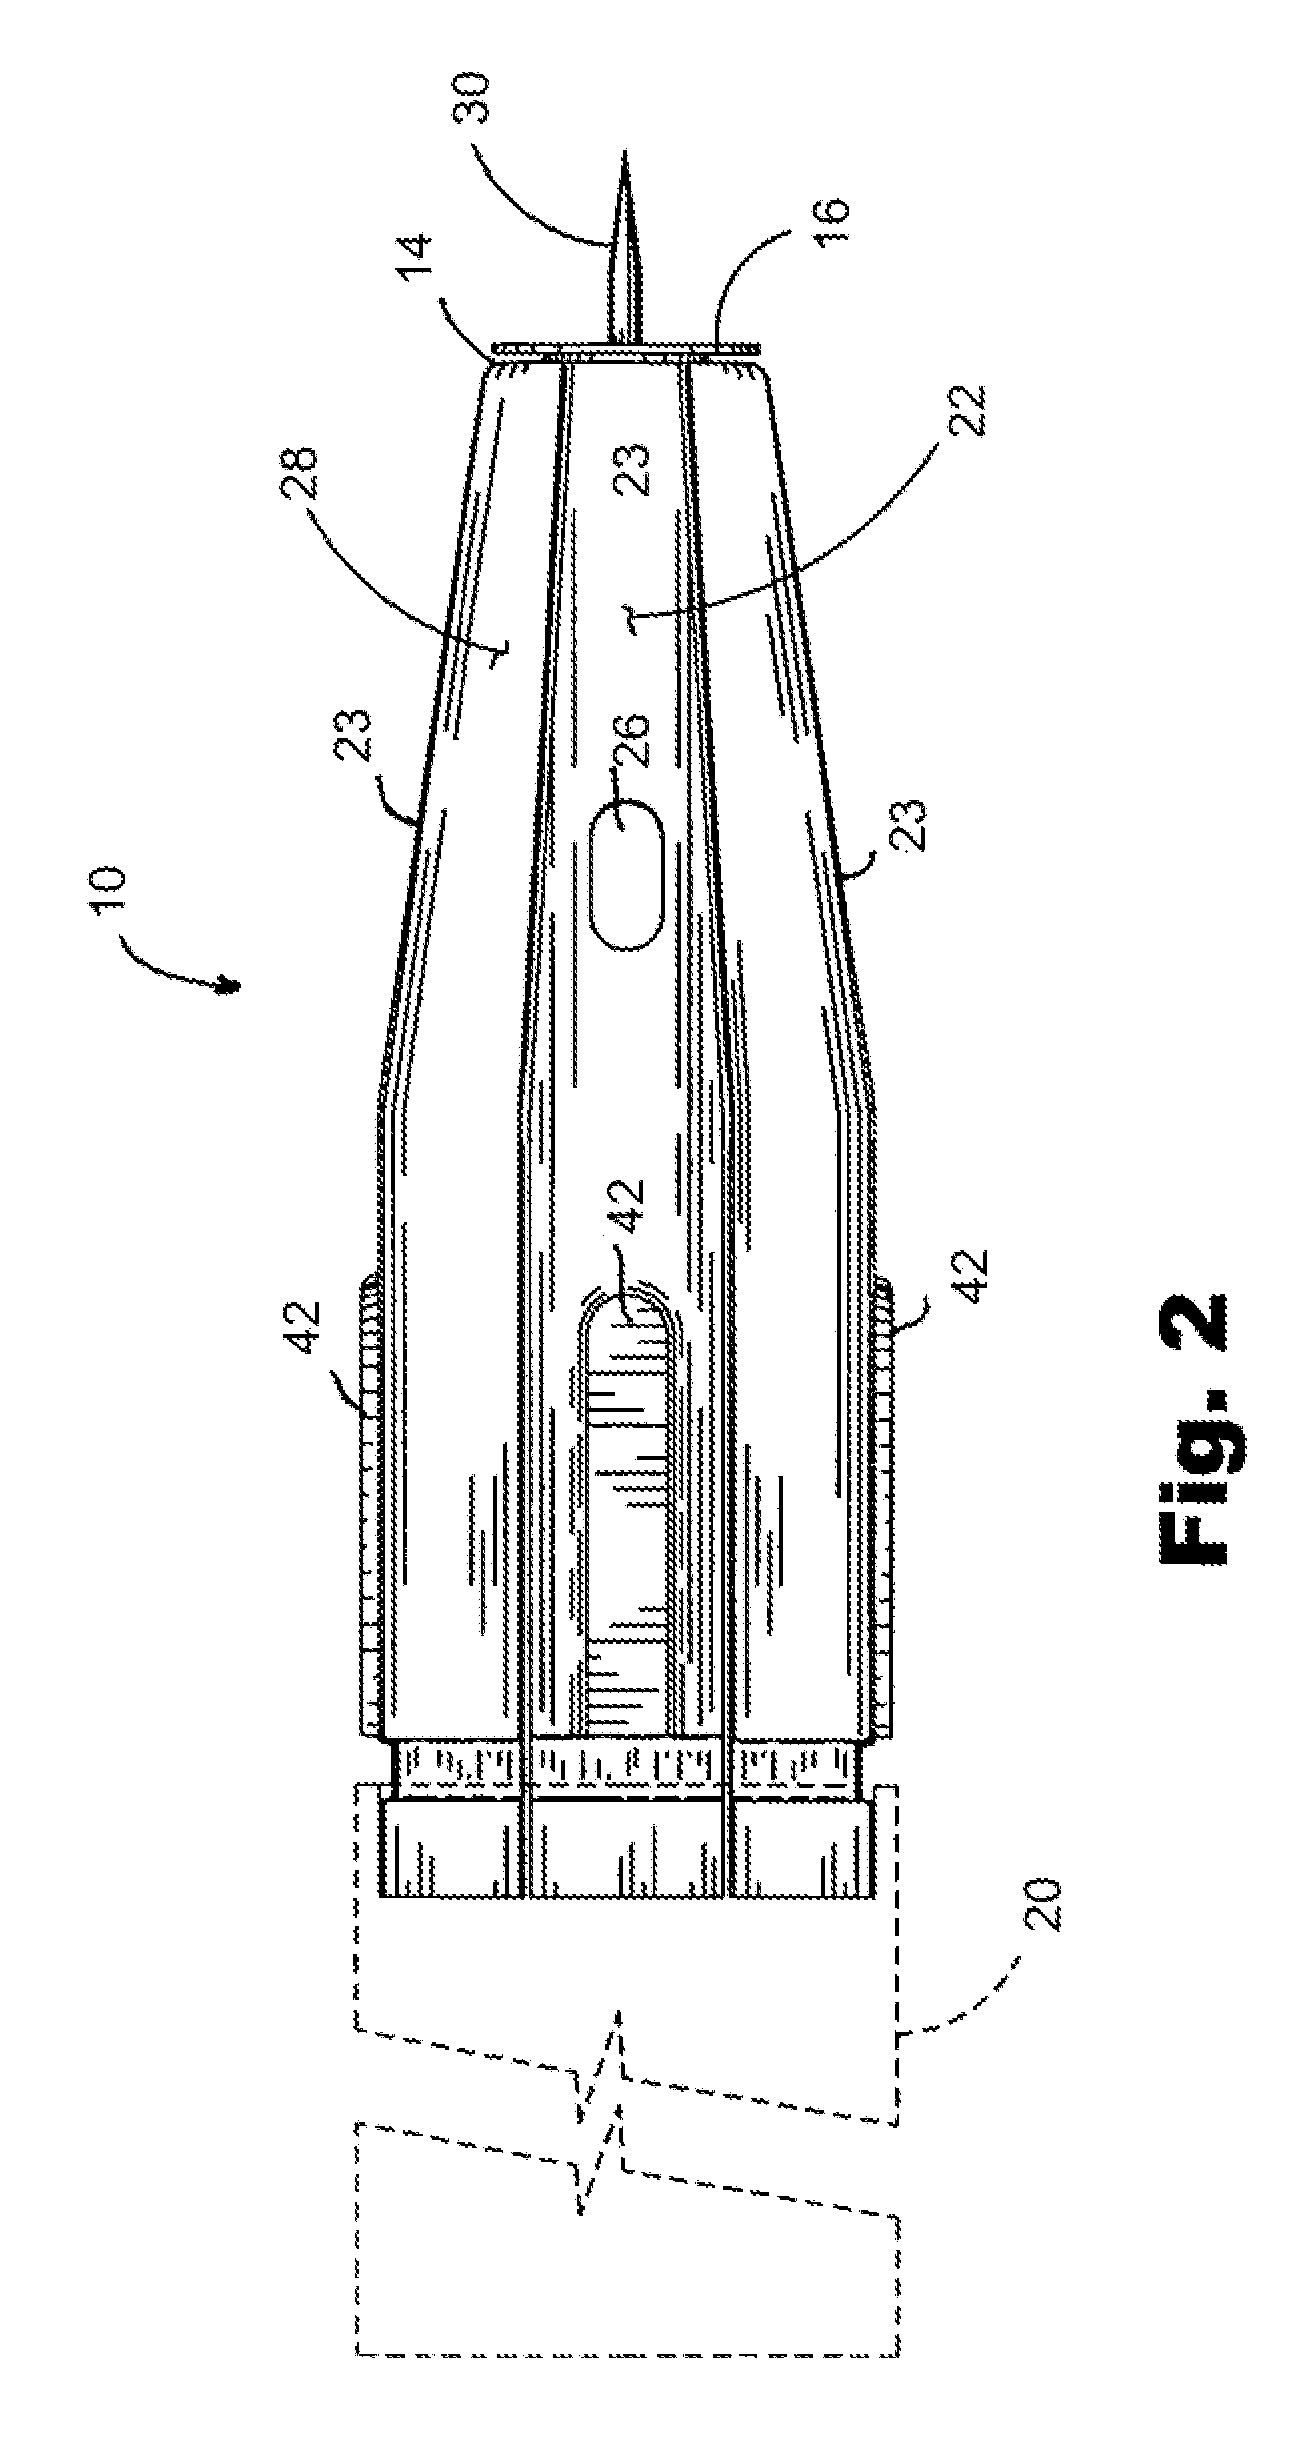 Electricity-inducing immobilization cartridge attachment